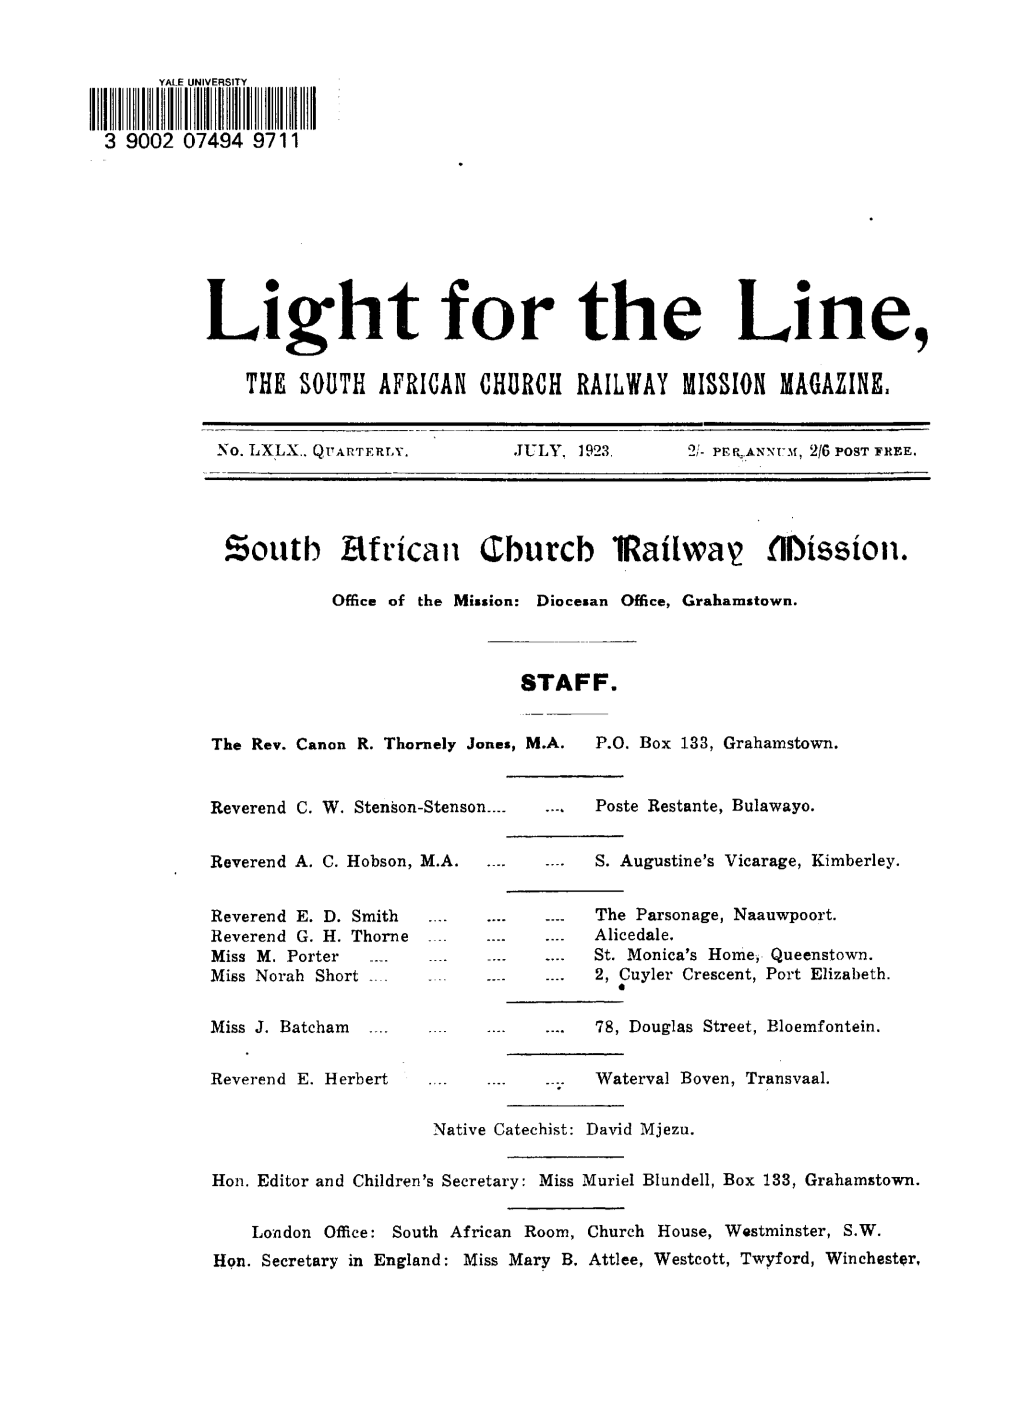 Light for the Line, the SOUTH AFRICAN CHURCH RAILWAY MISSION MAGAZINE